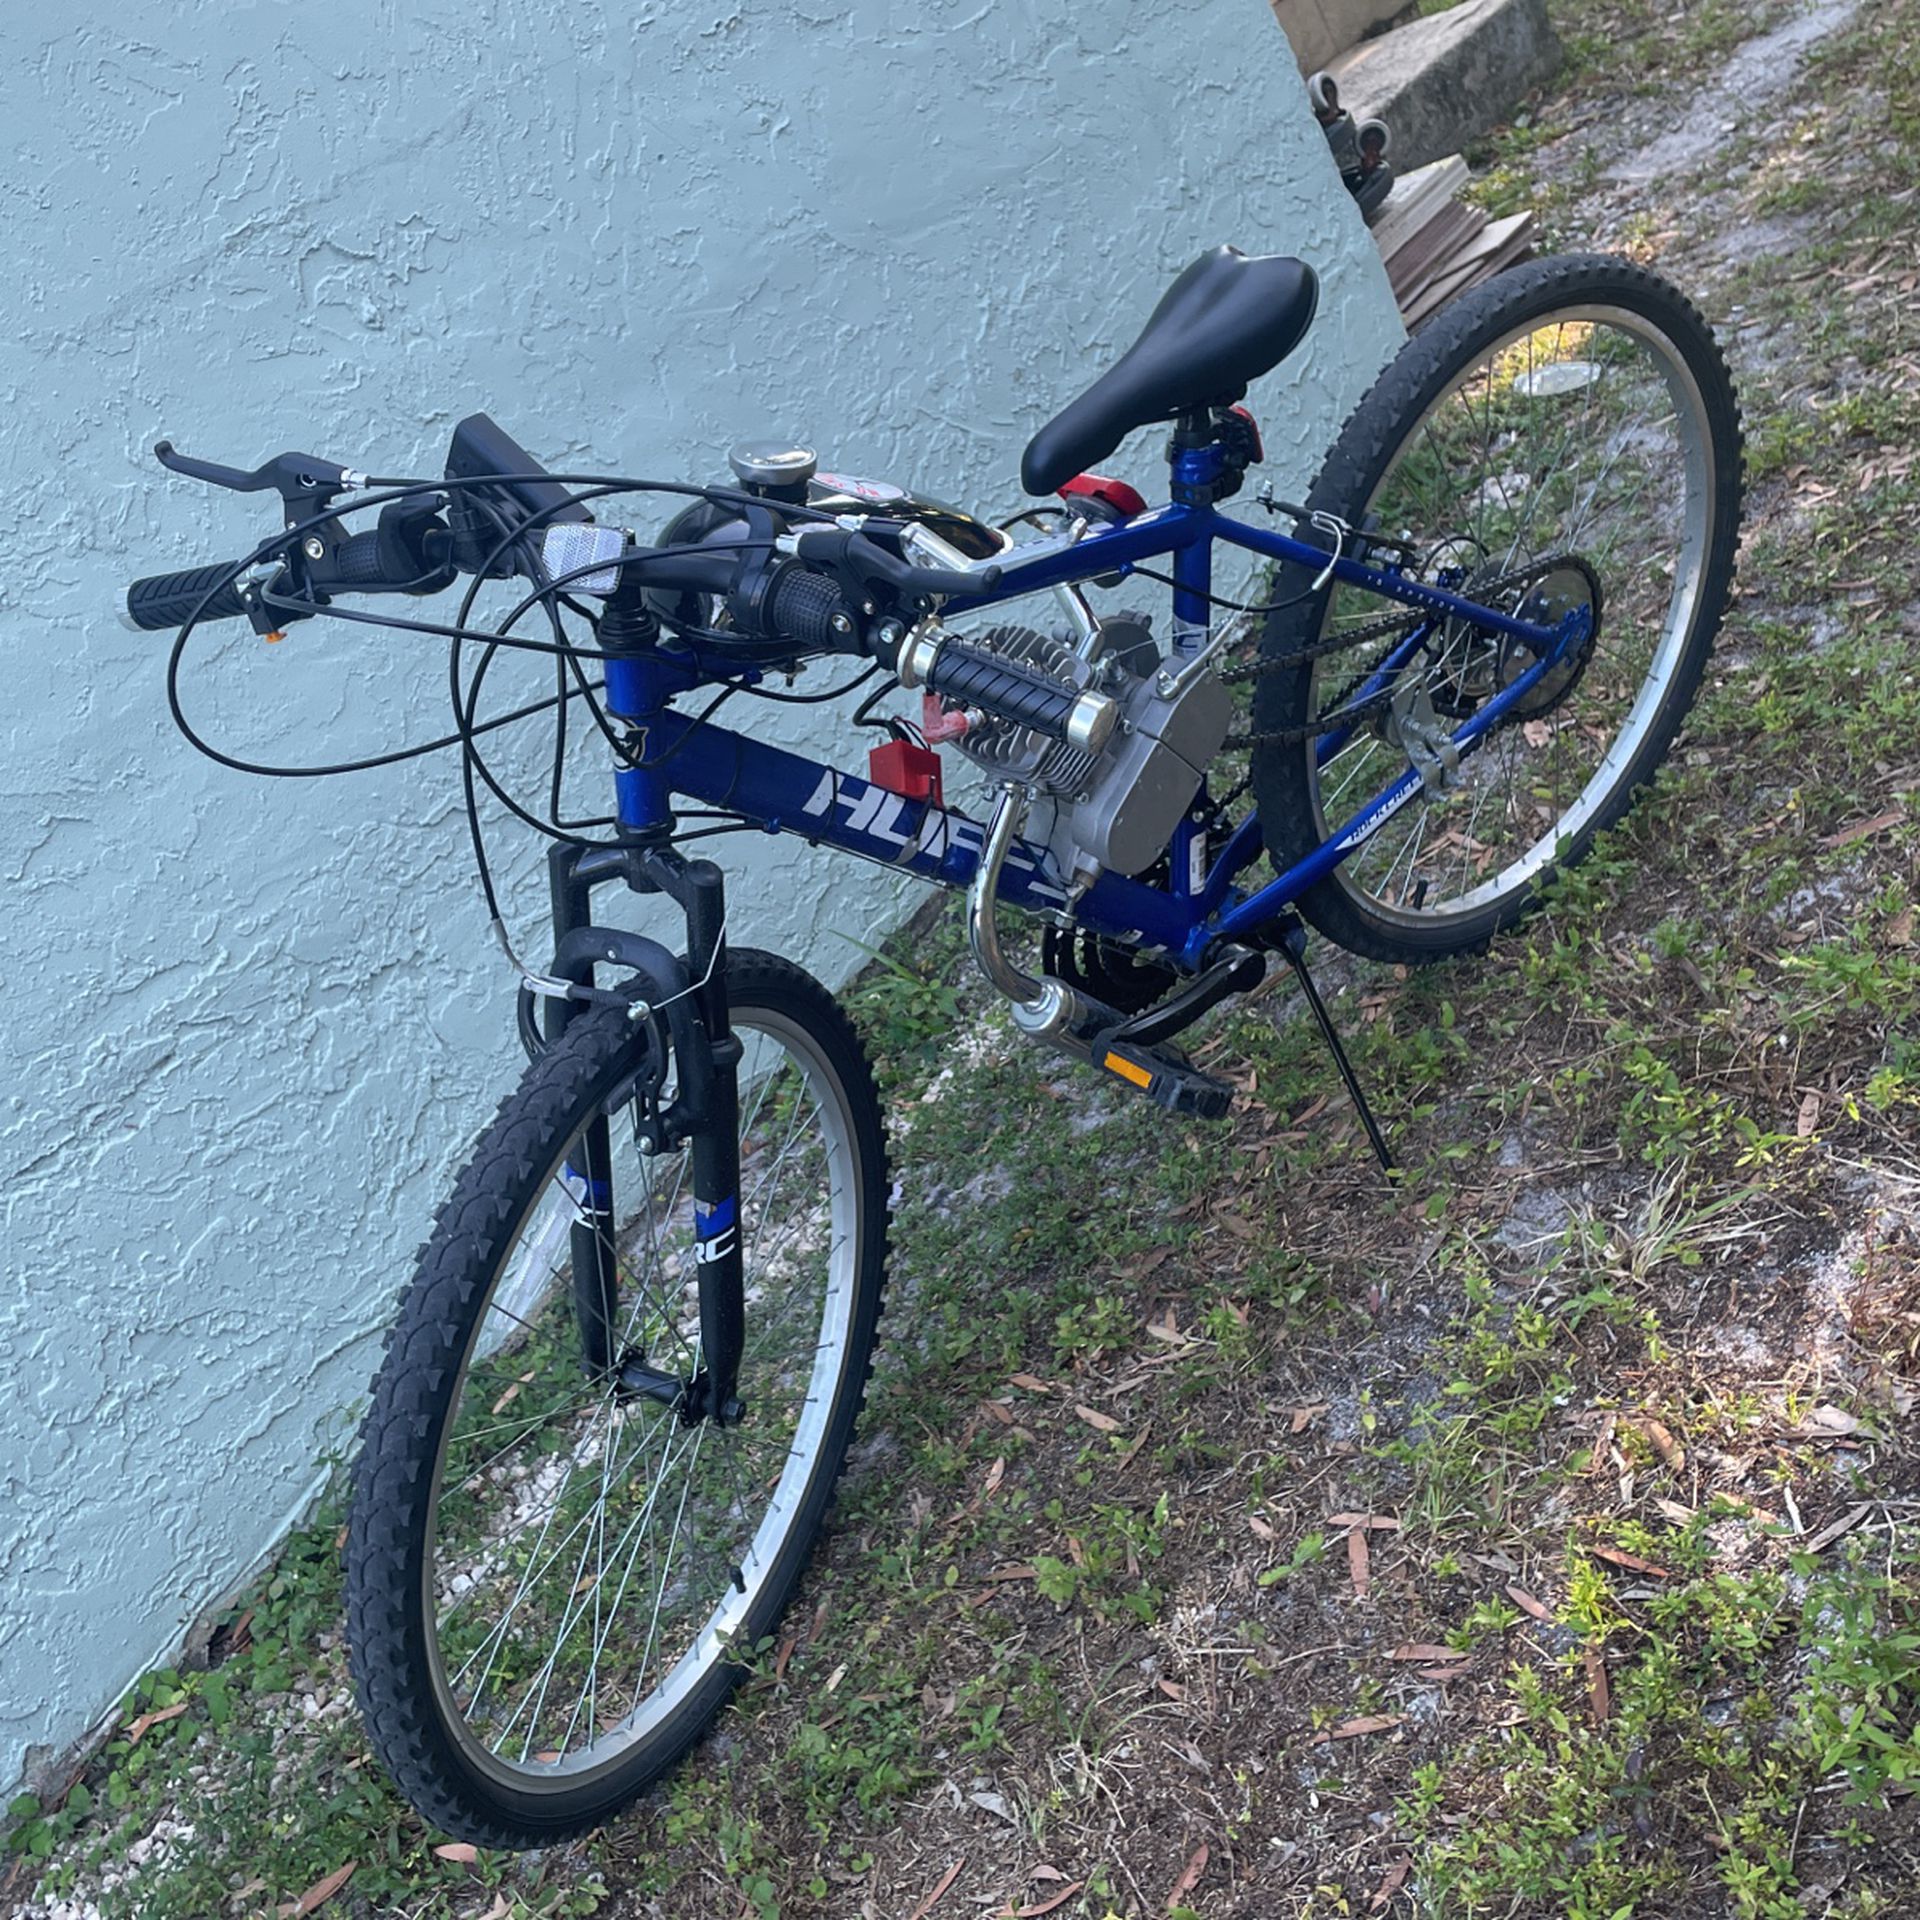 Gas Powered Bike For Sale Ft Lauderdale